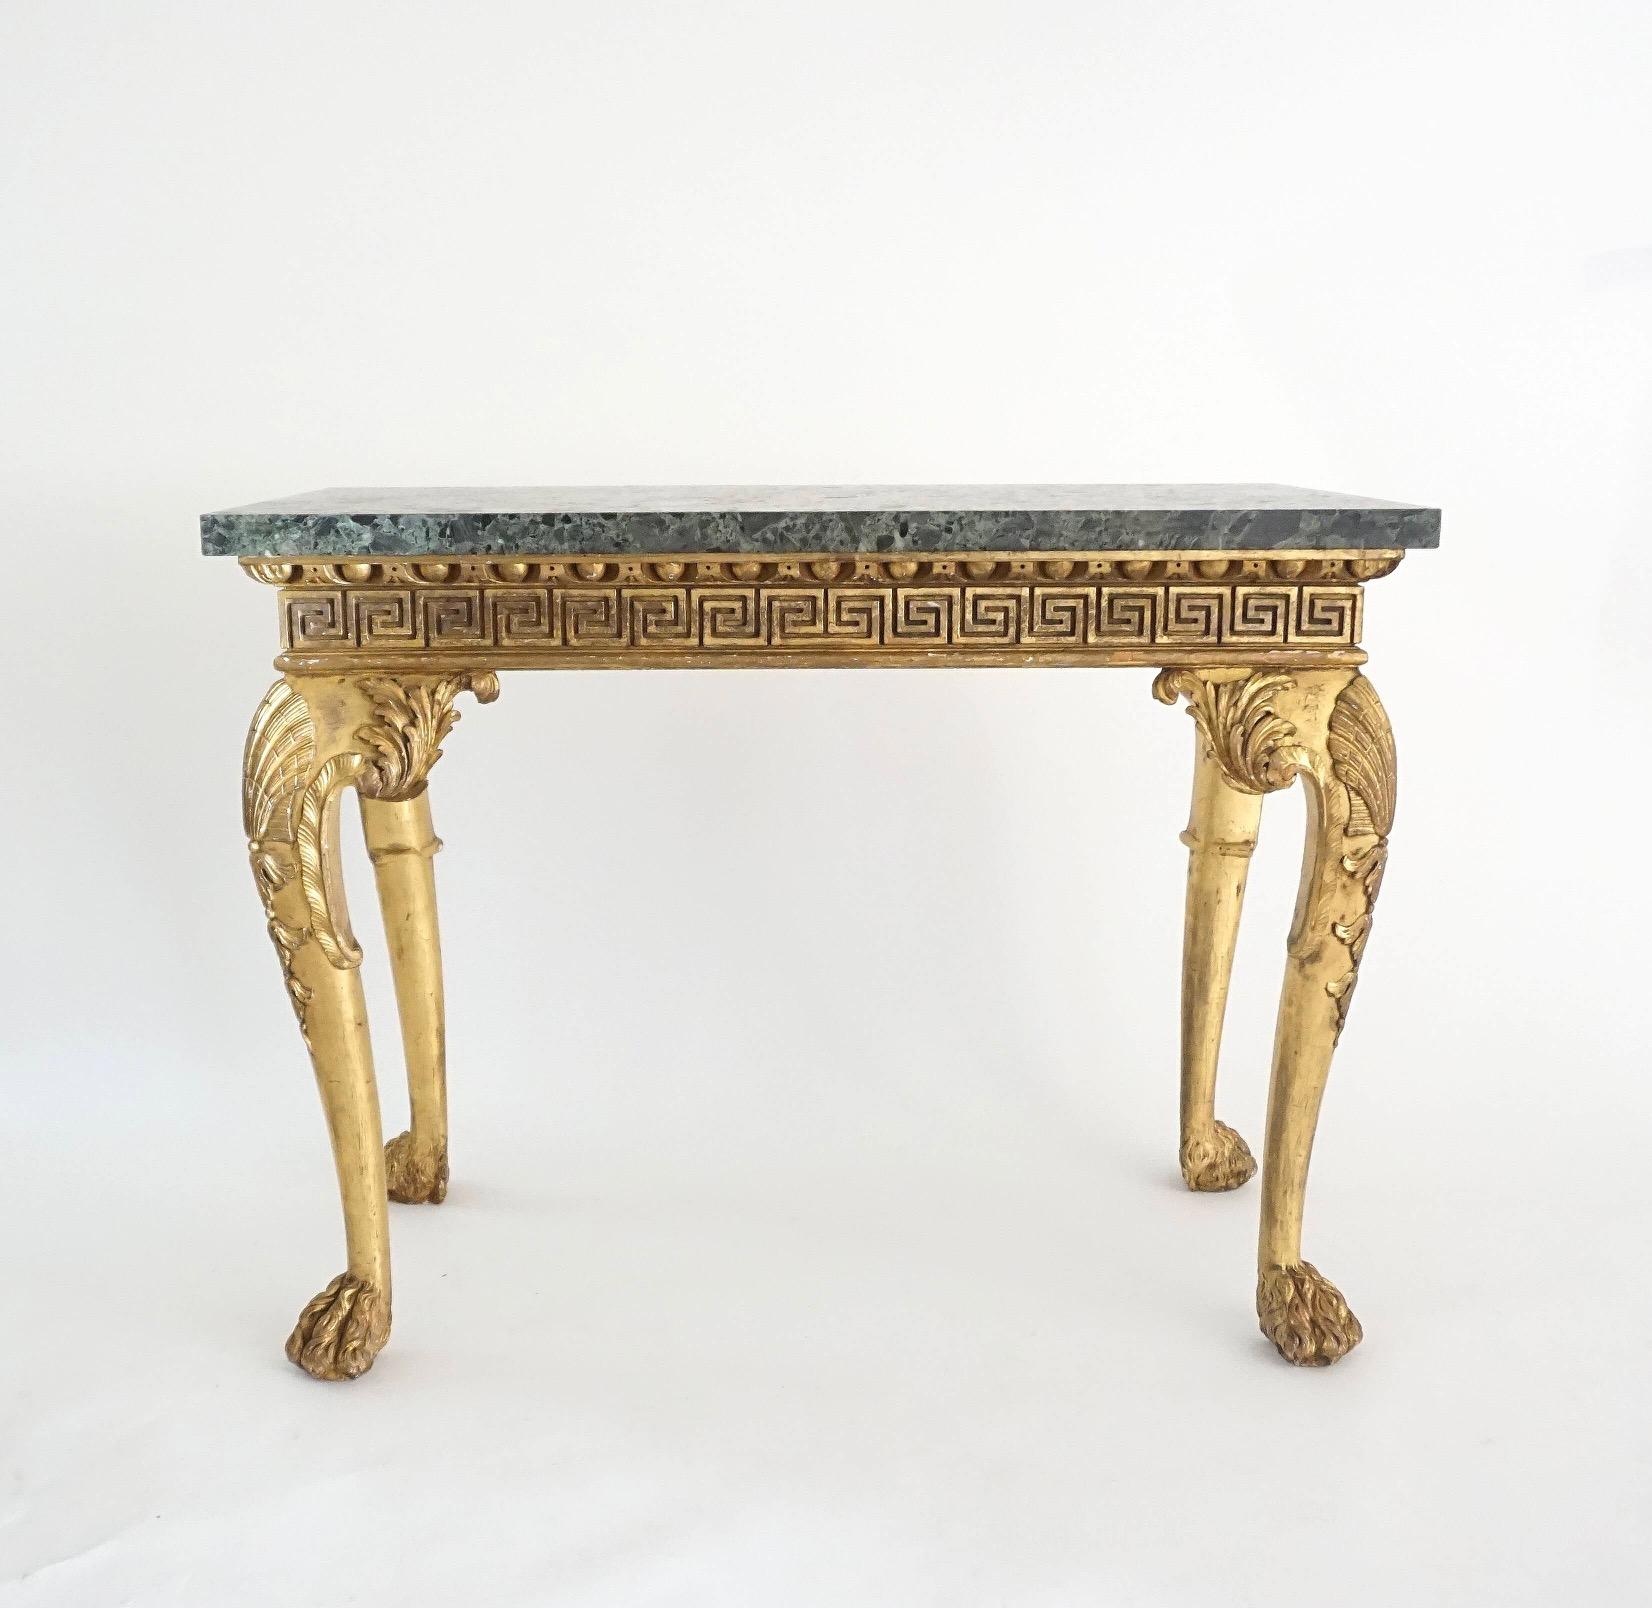 Anglo-Irish Regency Giltwood Side Tables, Manner of William Kent, circa 1815 For Sale 4